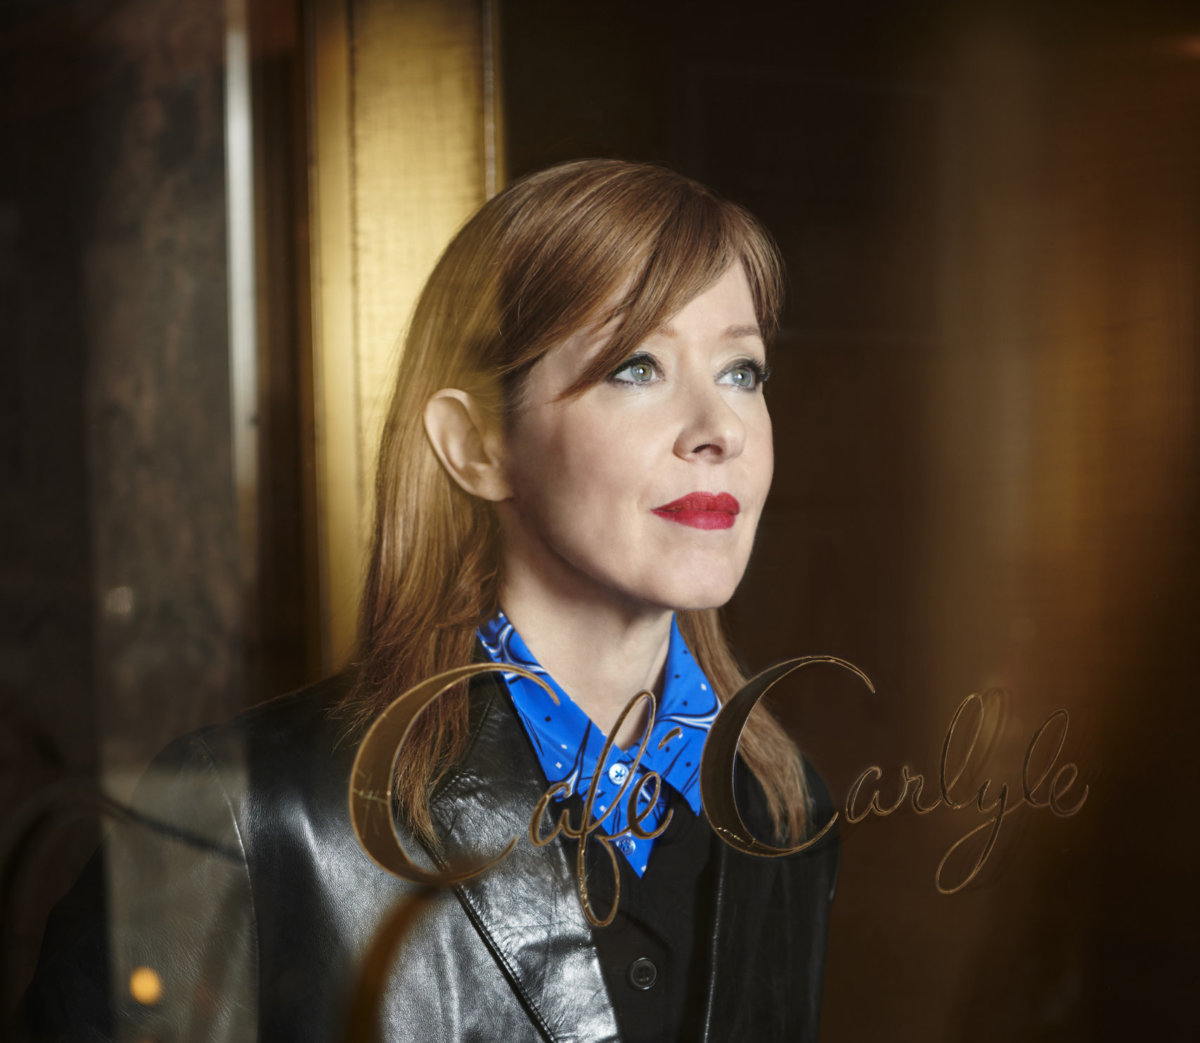 Suzanne Vega at Cafe Carlyle